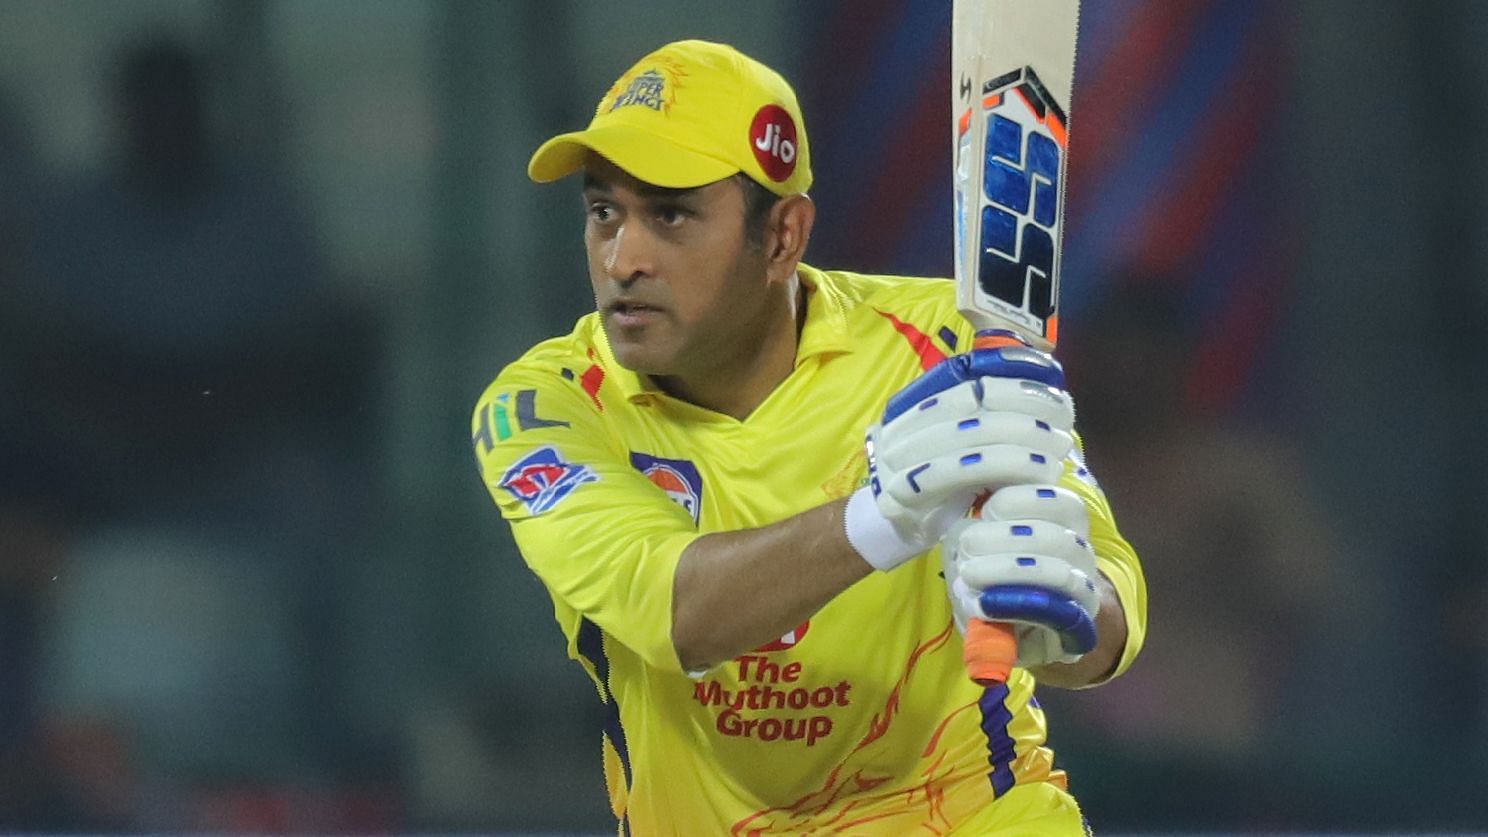 MS Dhoni has been suffering from a back problem throughout this edition of IPL and it was very evident in the last game against Kolkata.